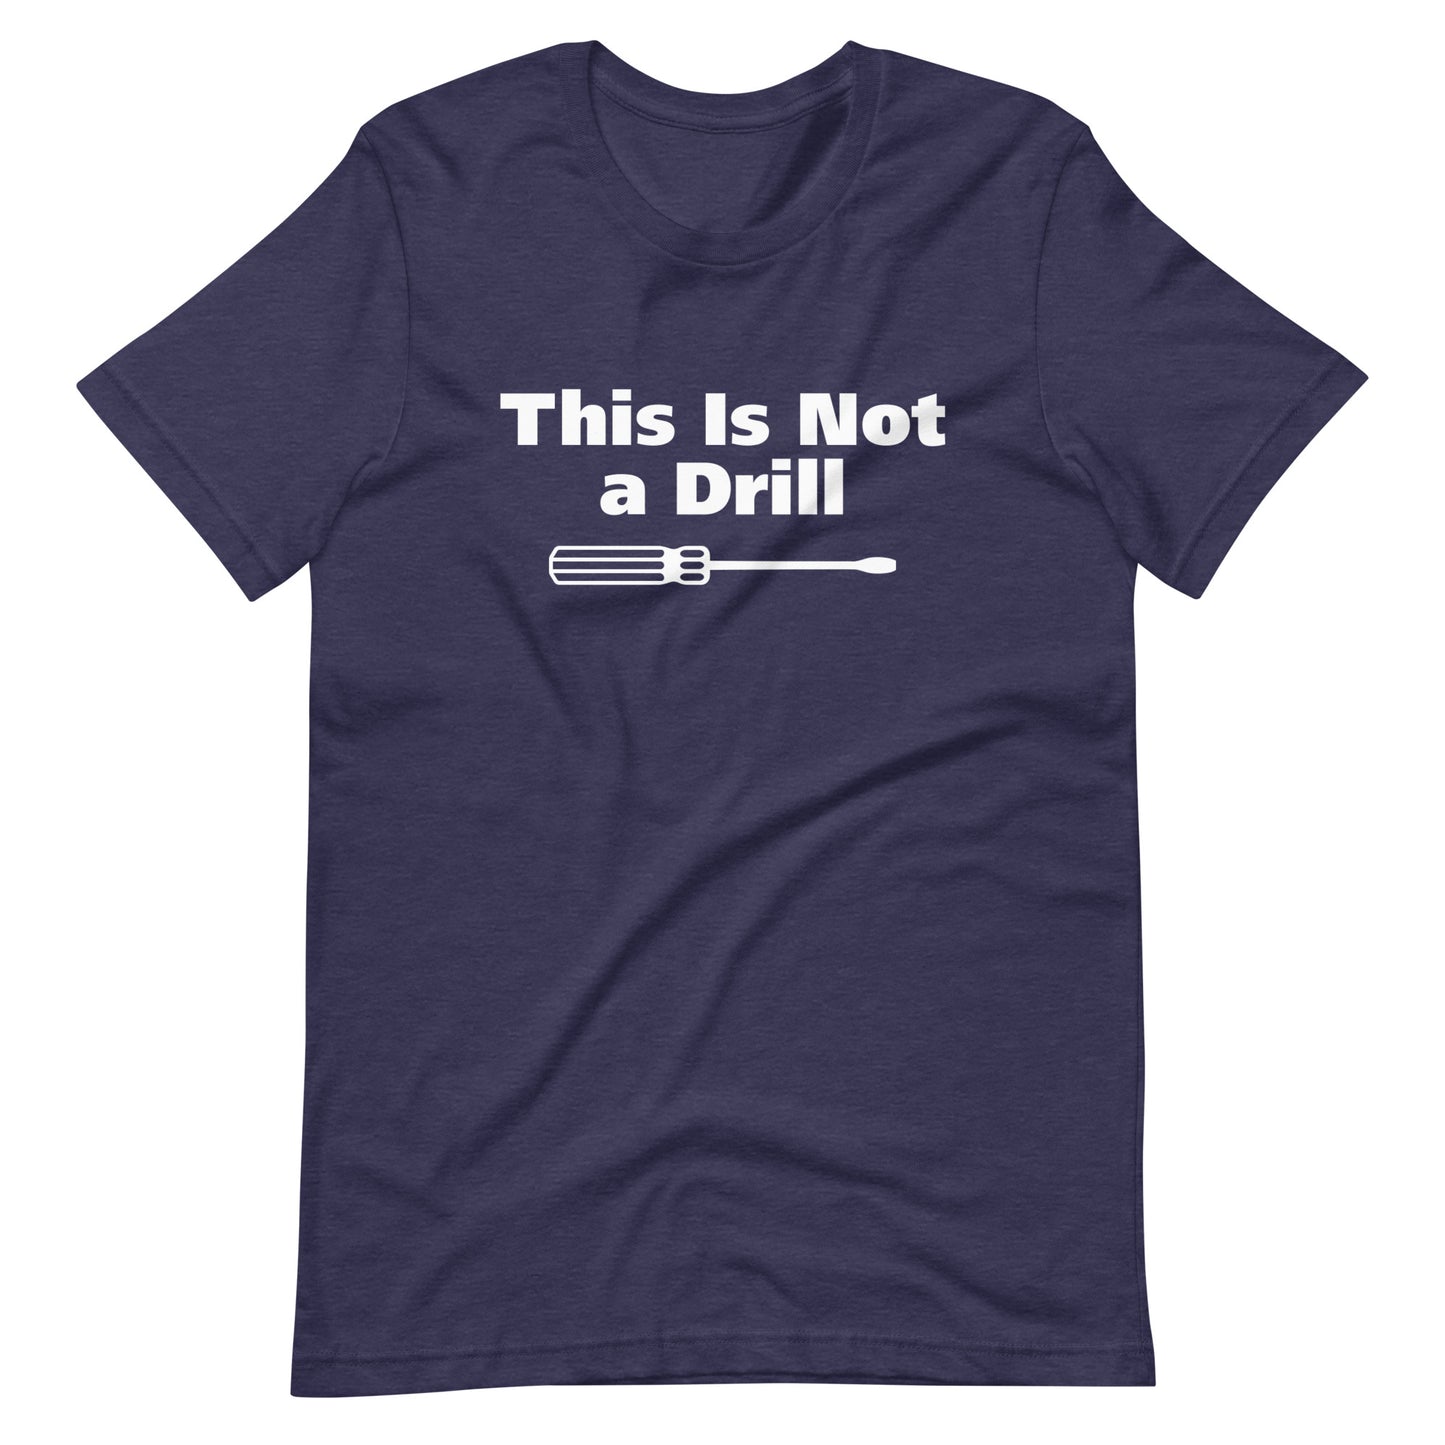 This Is Not a Drill Bella + Canvas T-Shirt